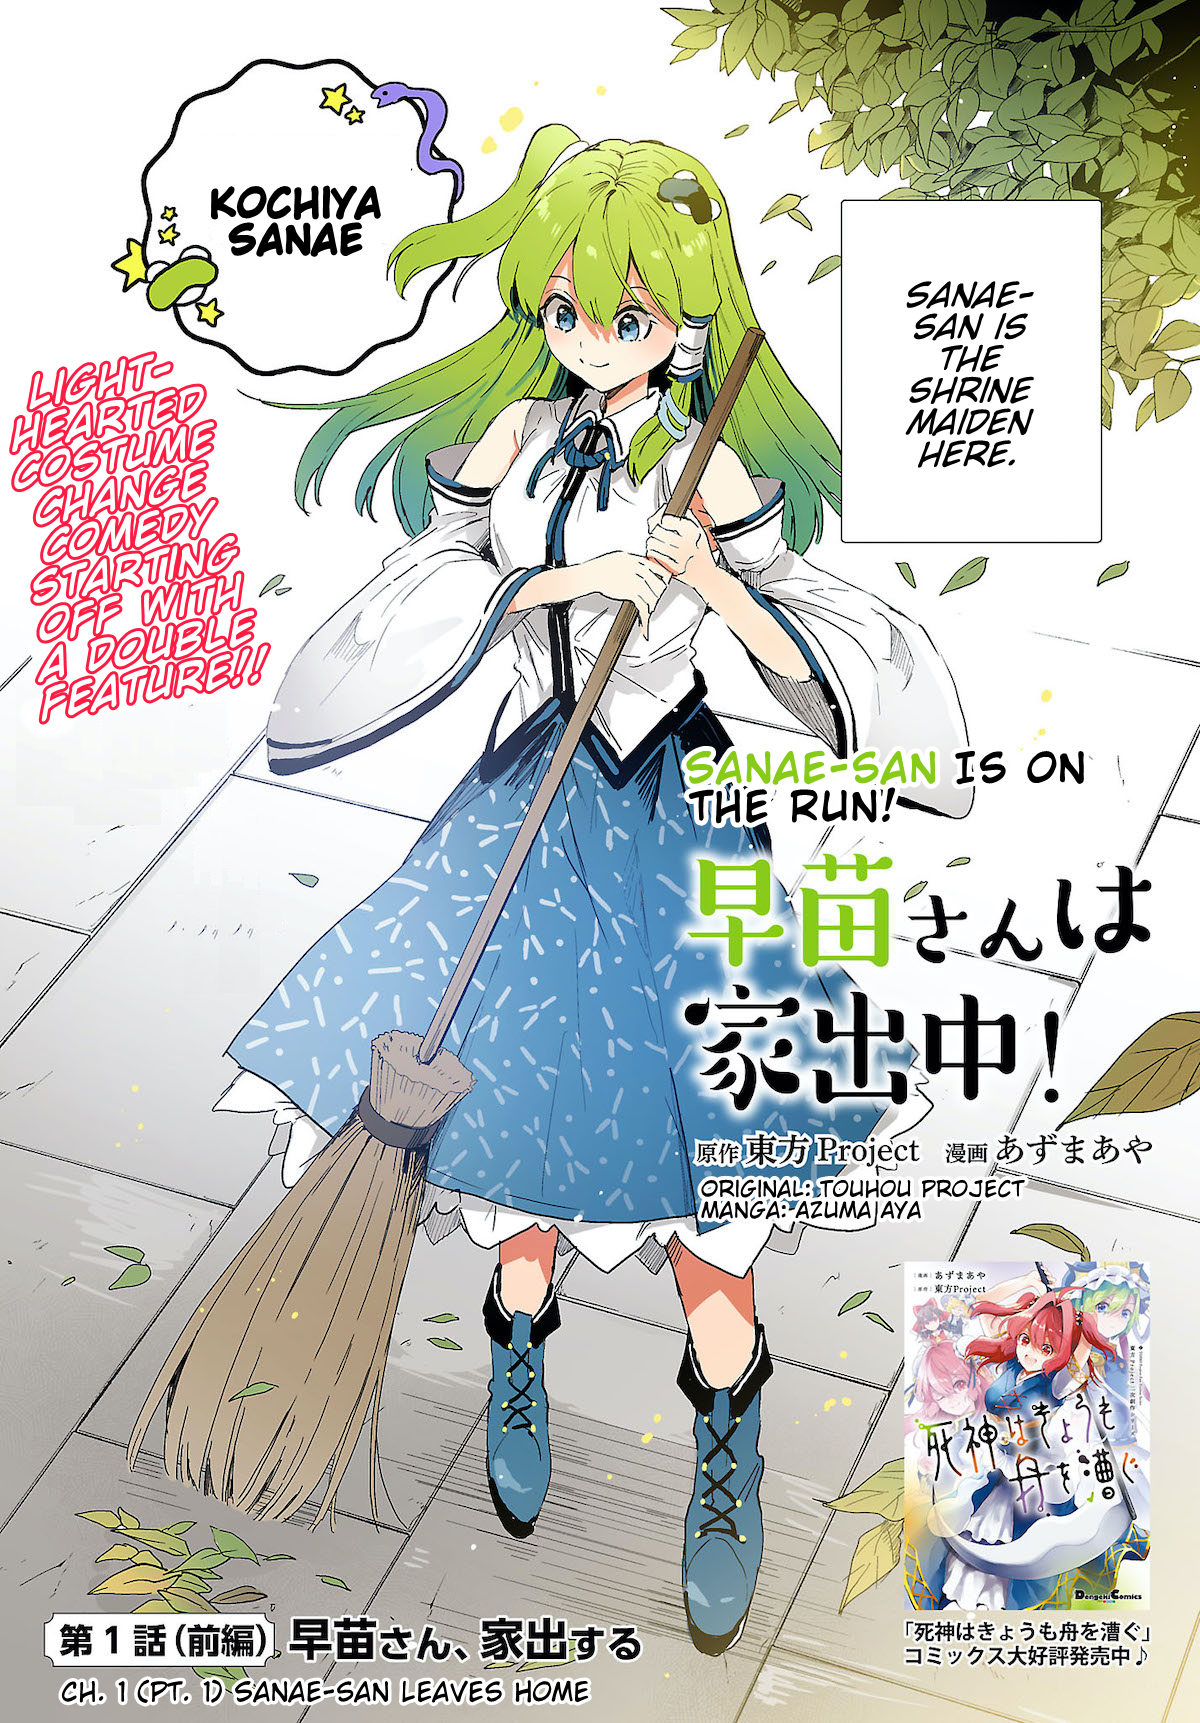 Touhou - Sanae-San Is On The Run! Chapter 1.1: Sanae-San Leaves Home - Picture 2